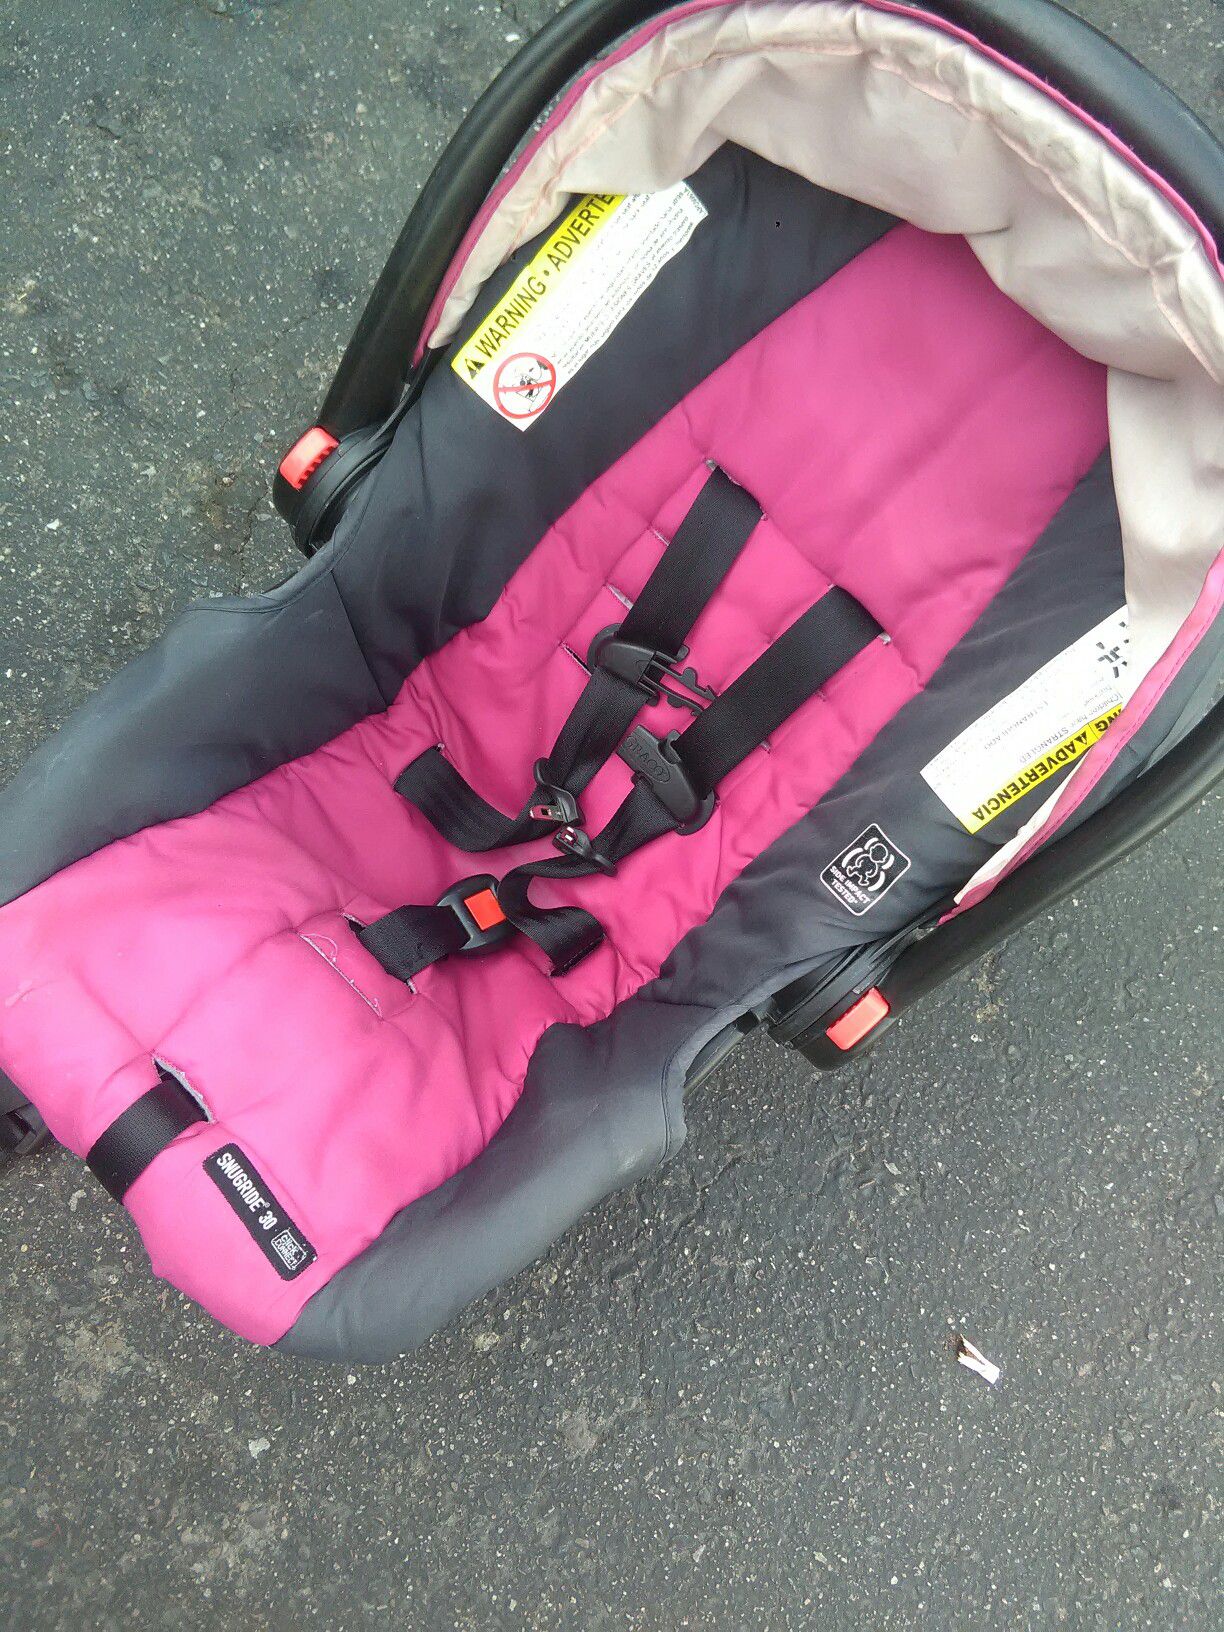 Car seat and carrier